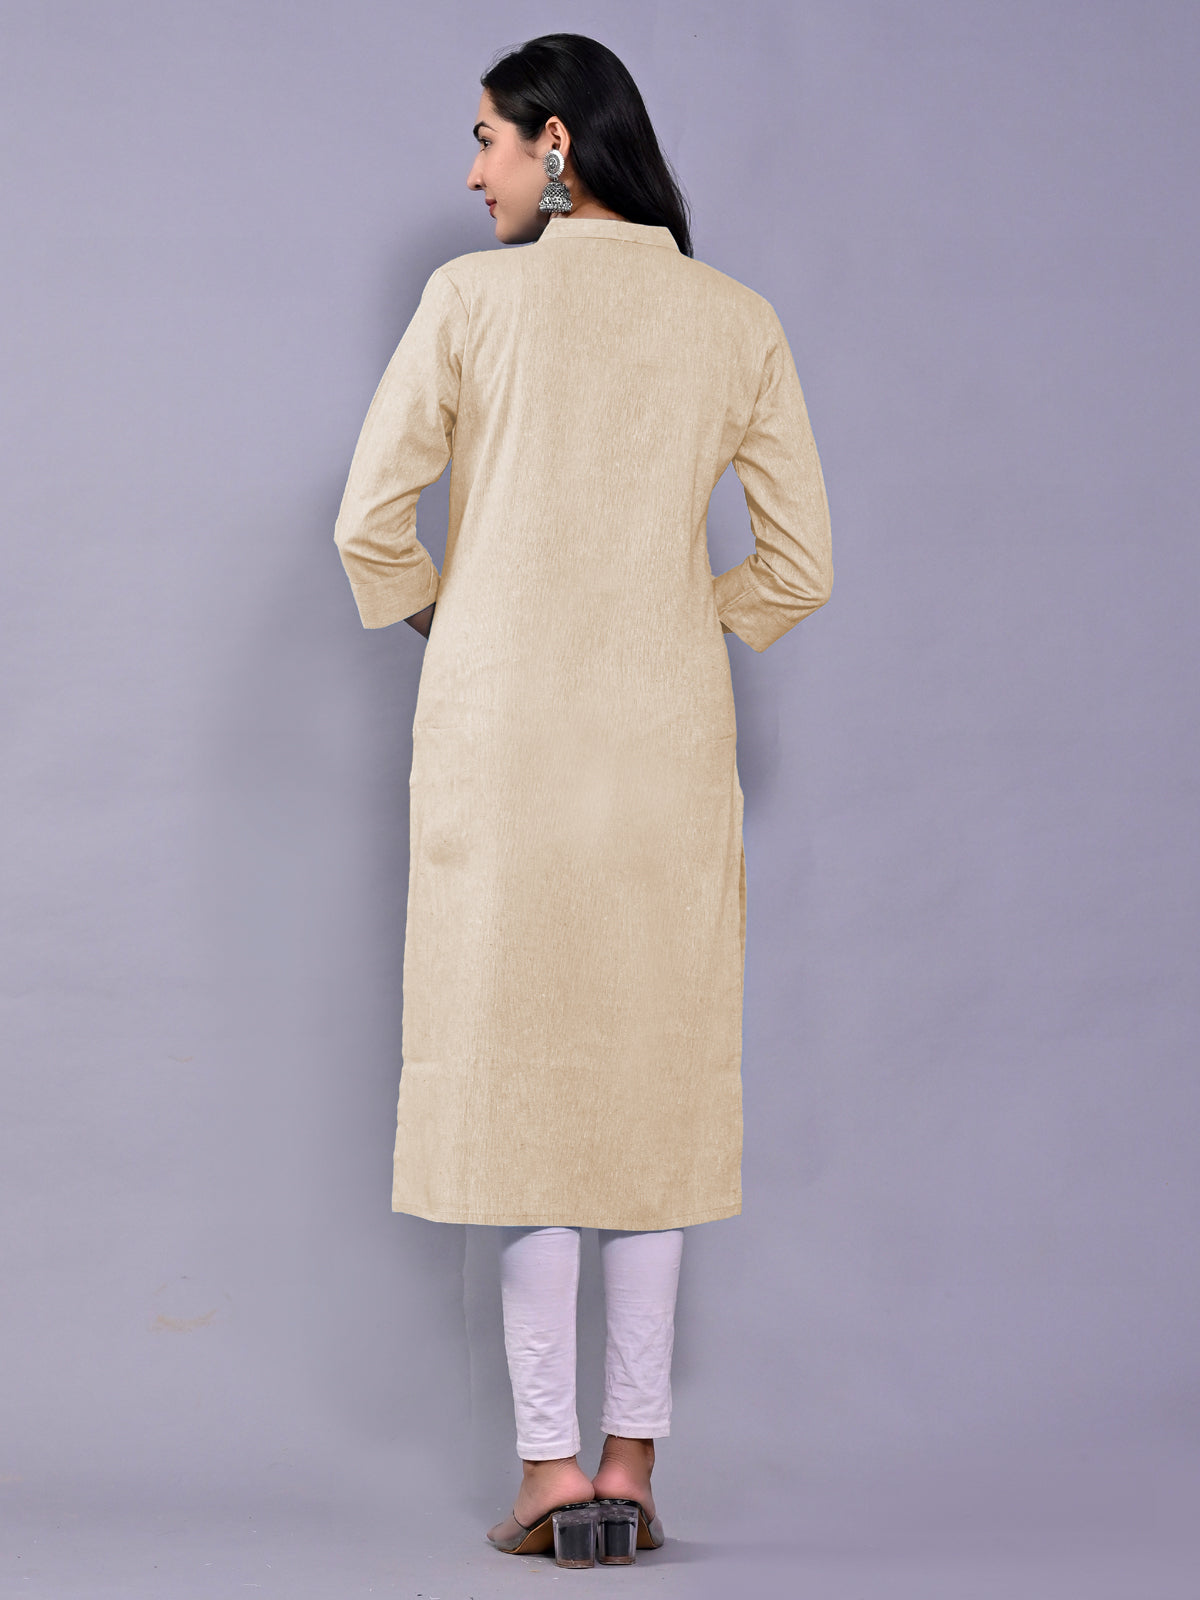 Women Solid Biscuit Woven South Cotton Kurti